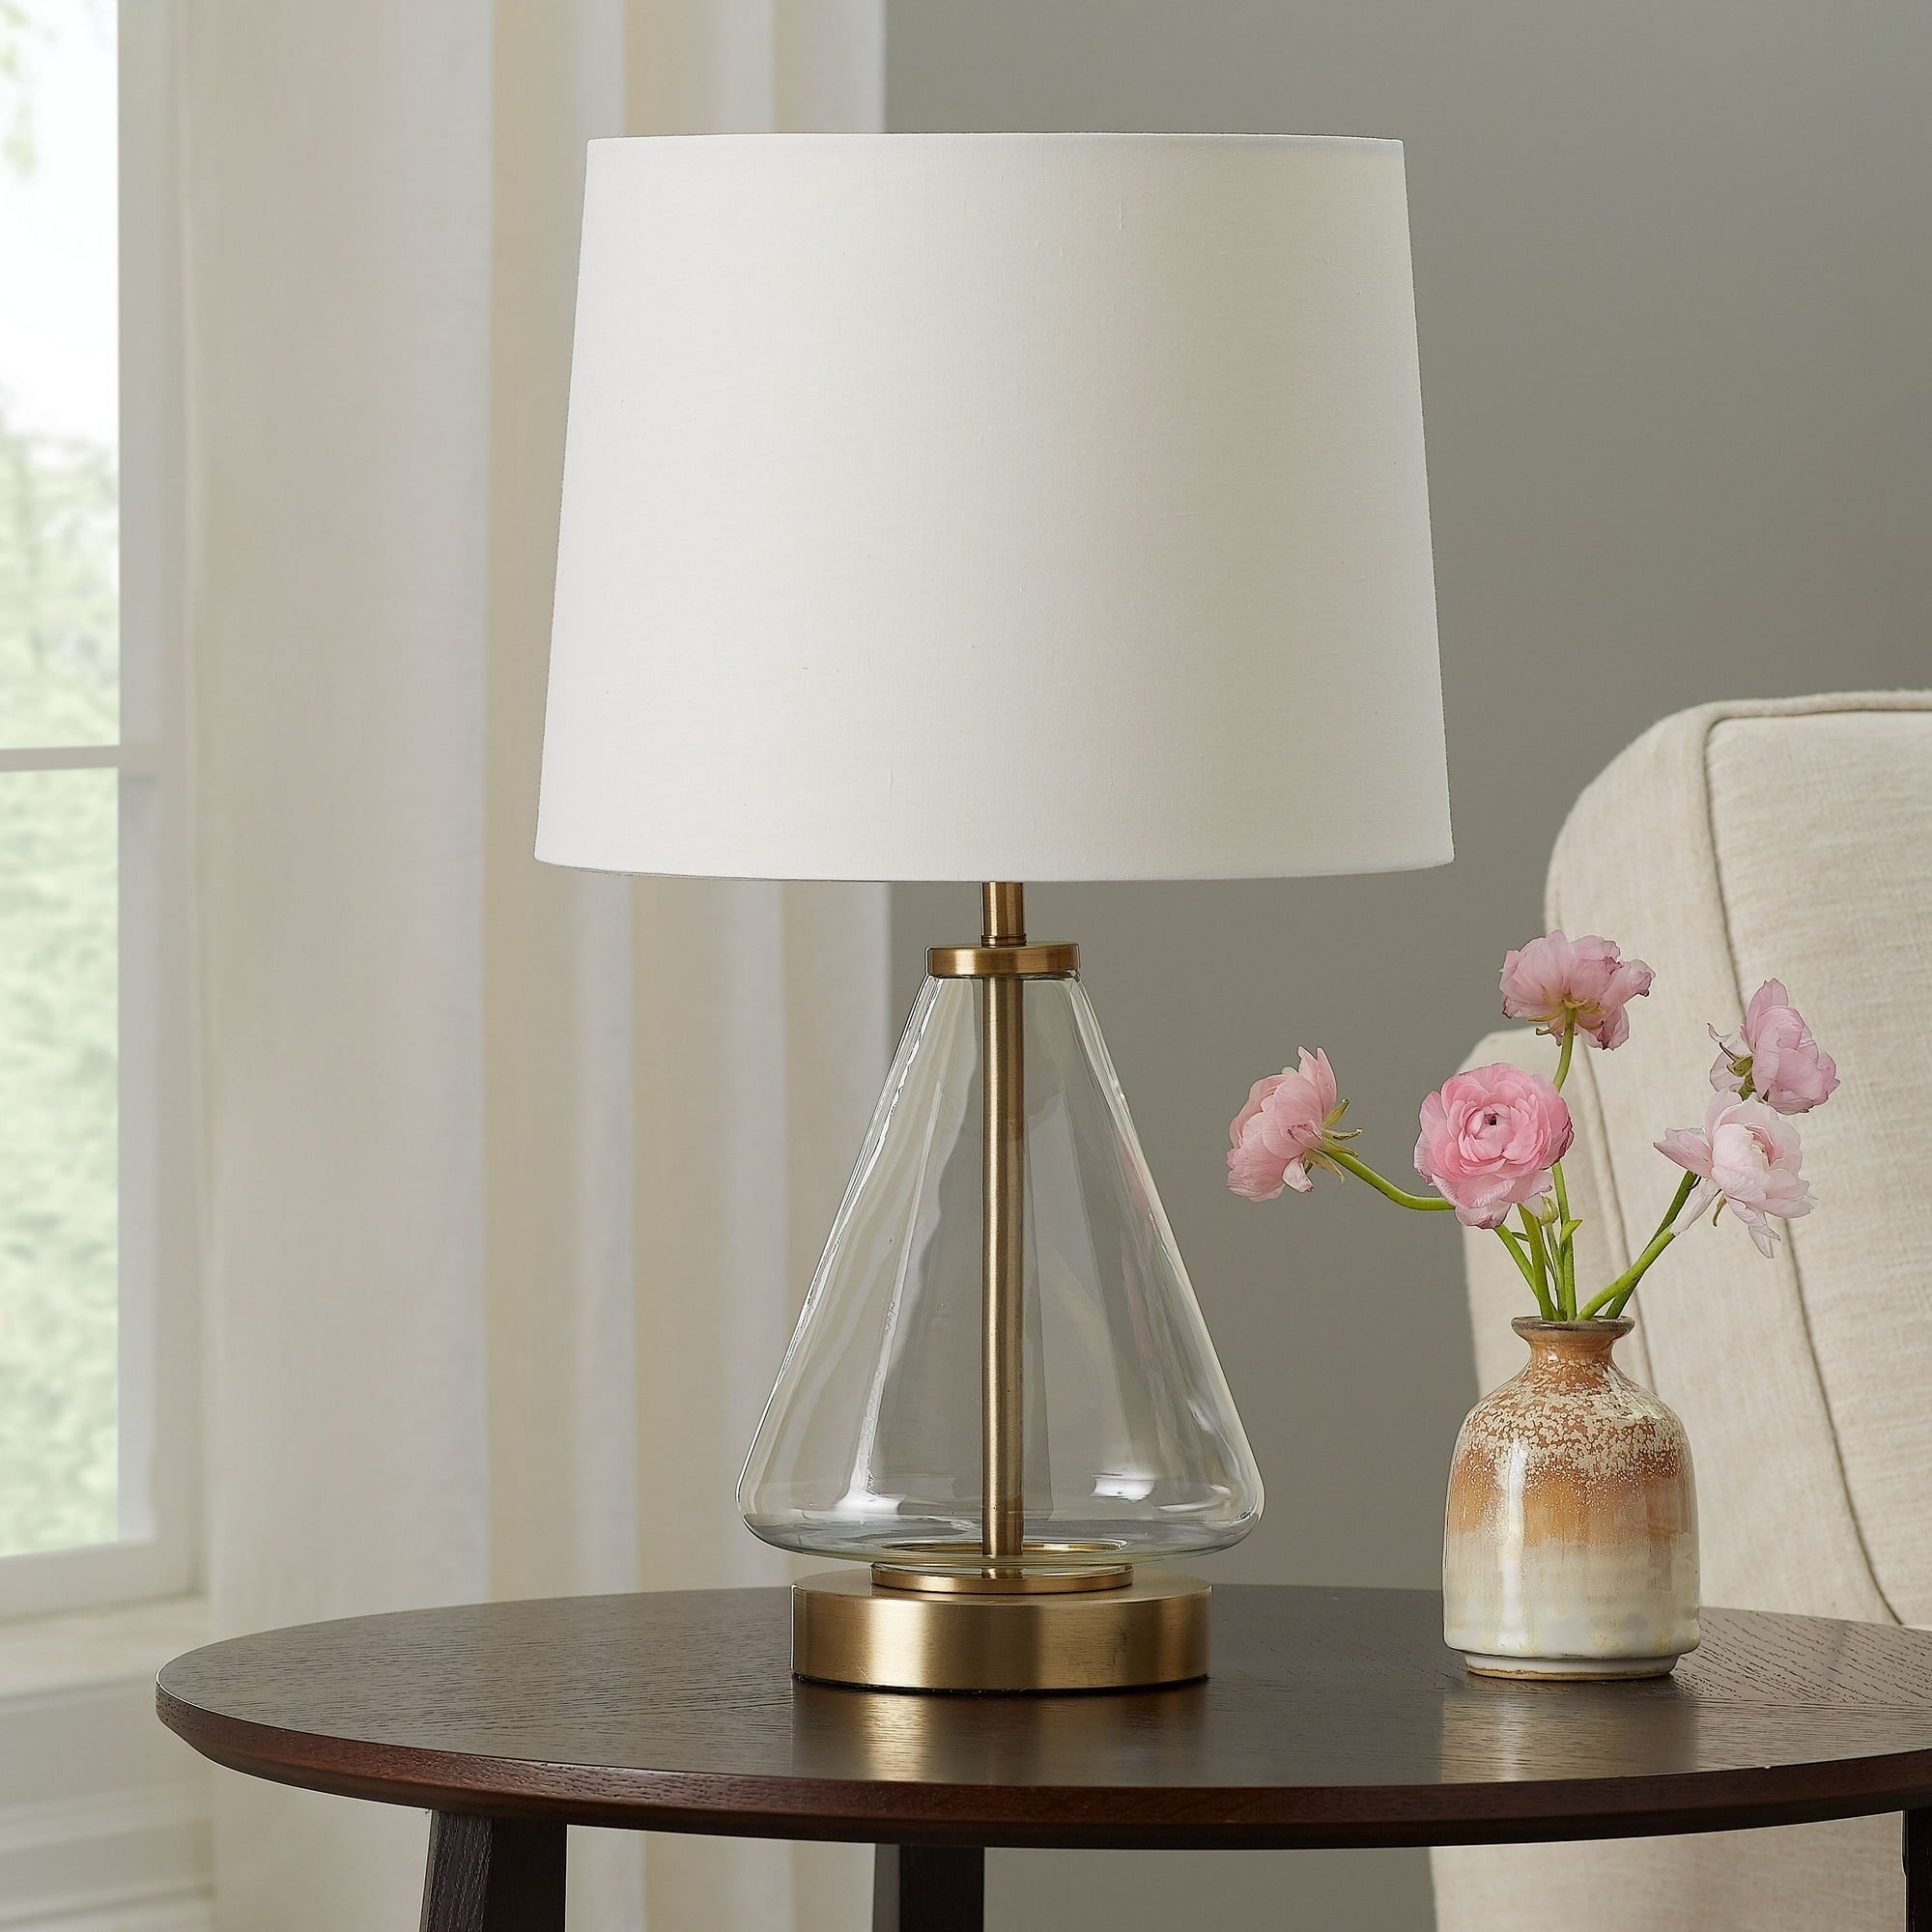 the lamp with a brass and glass base on a side table